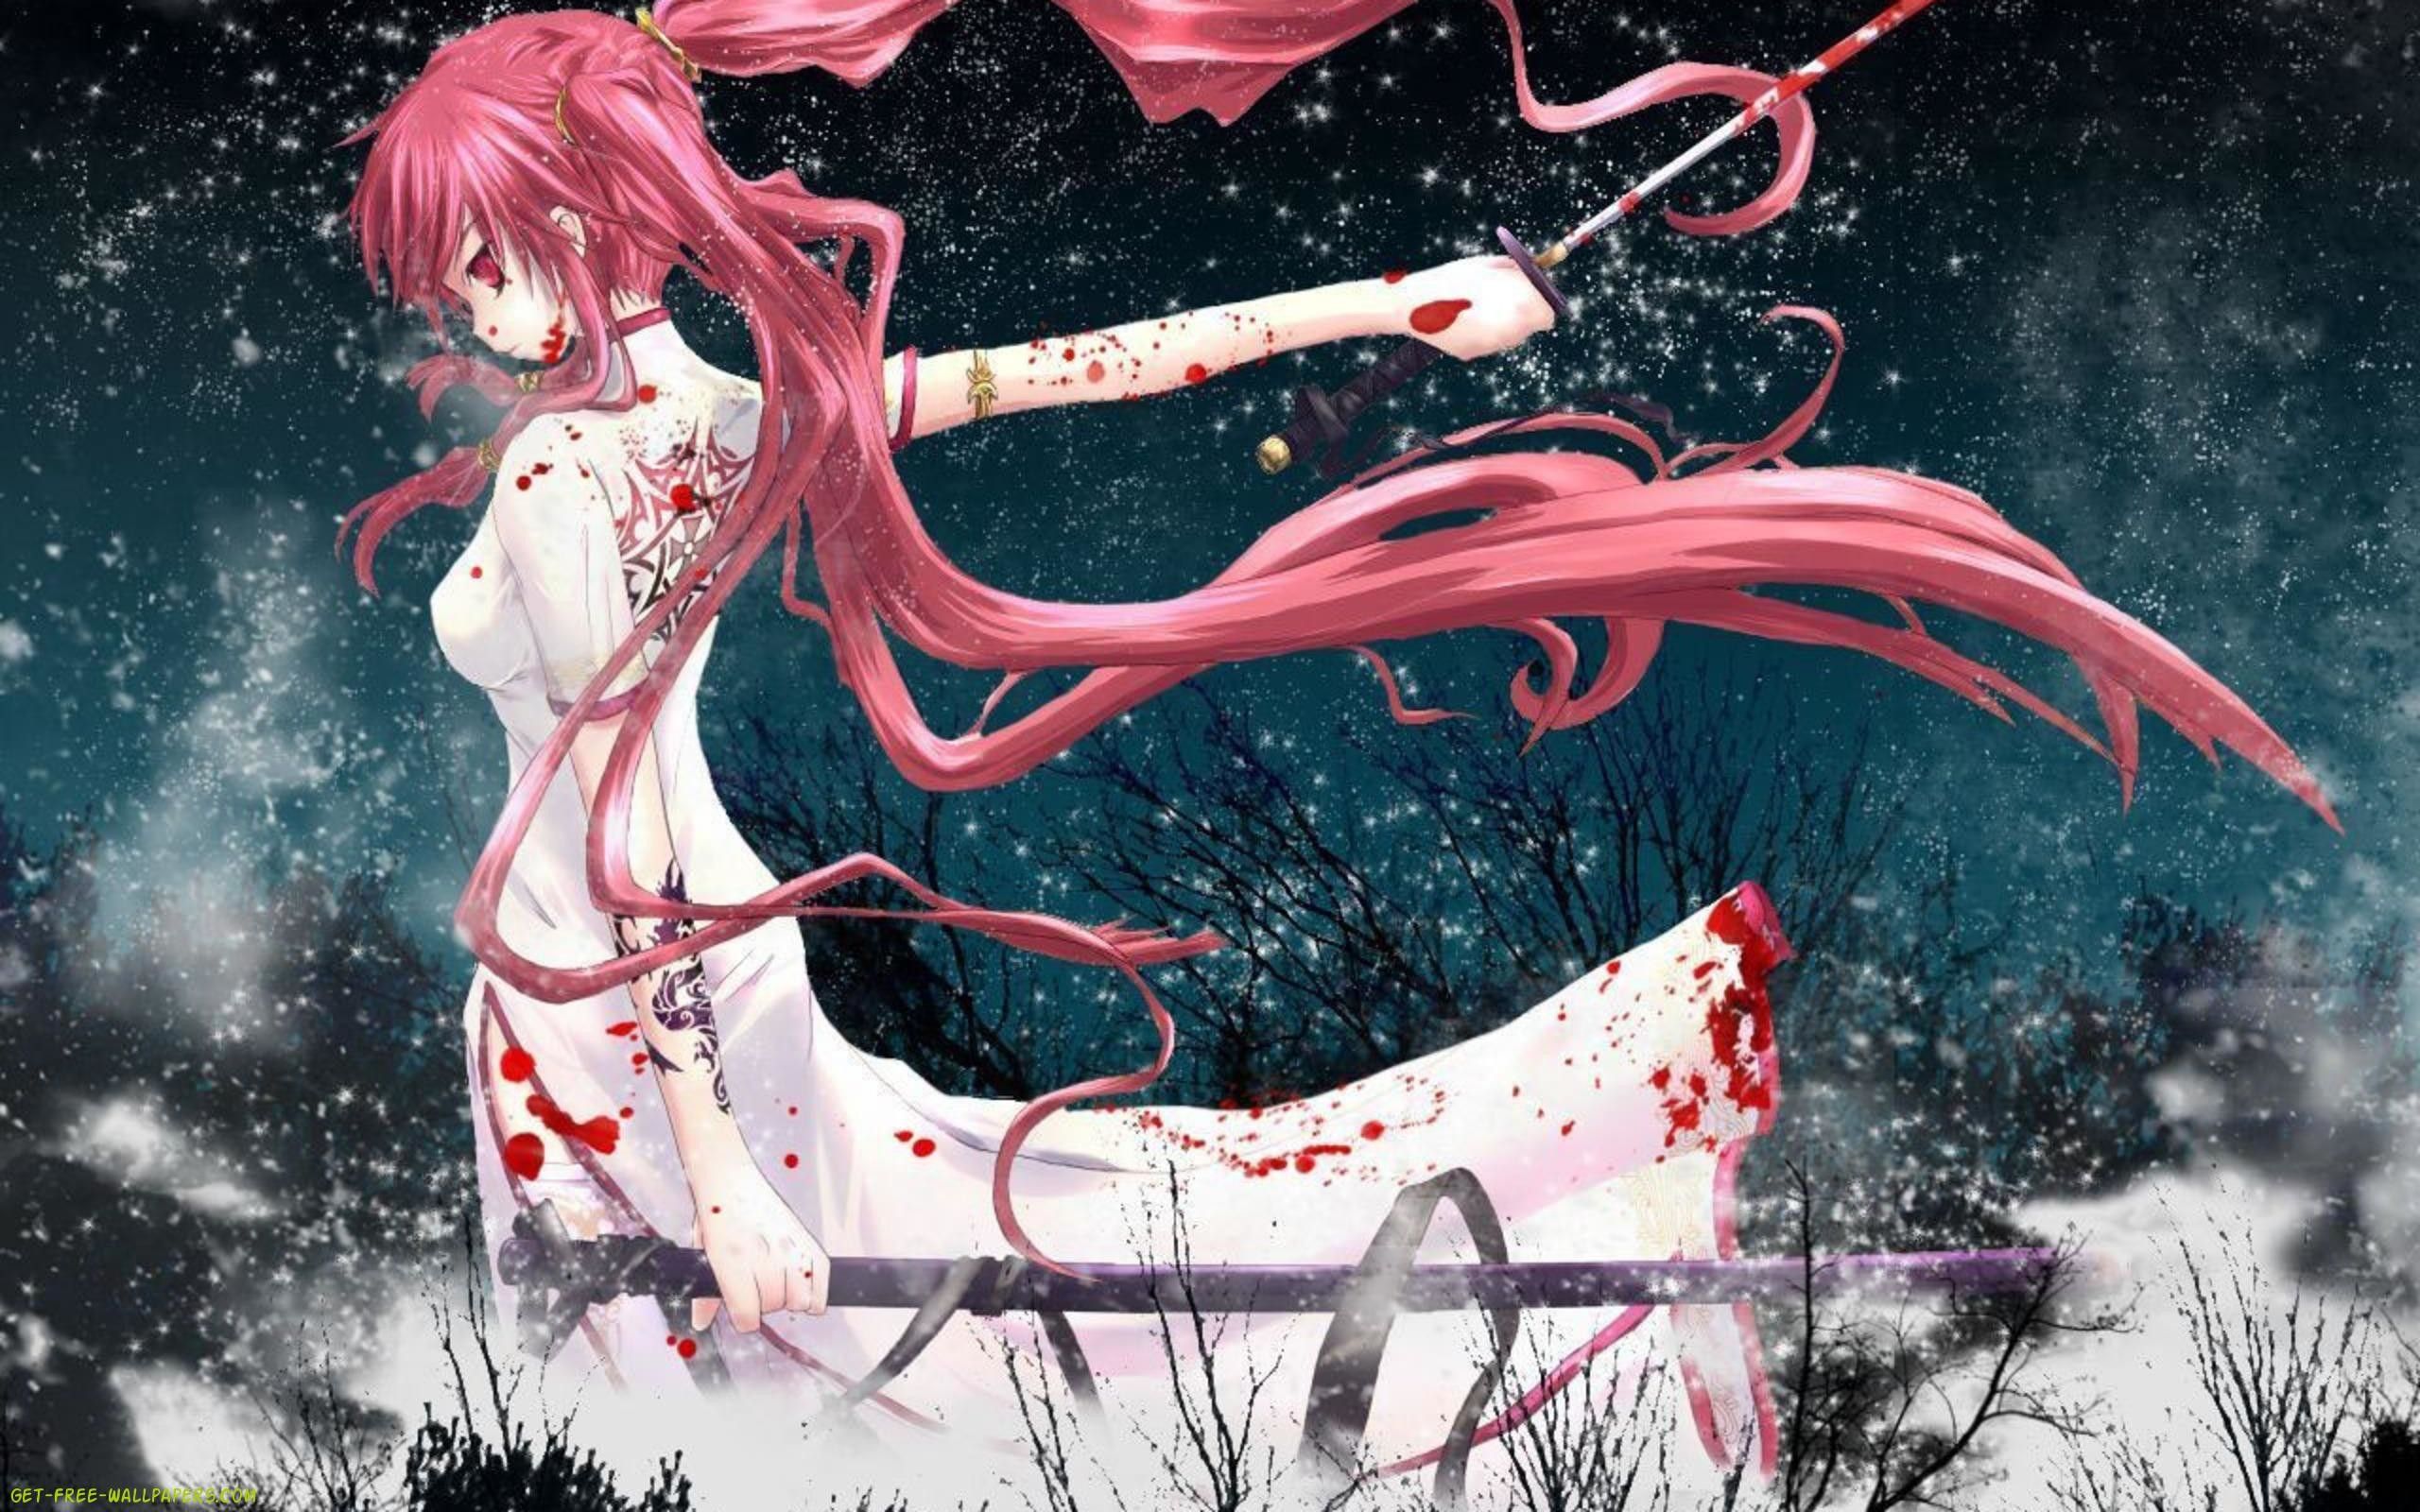 Bloody Anime wallpaper wallpaper Collections